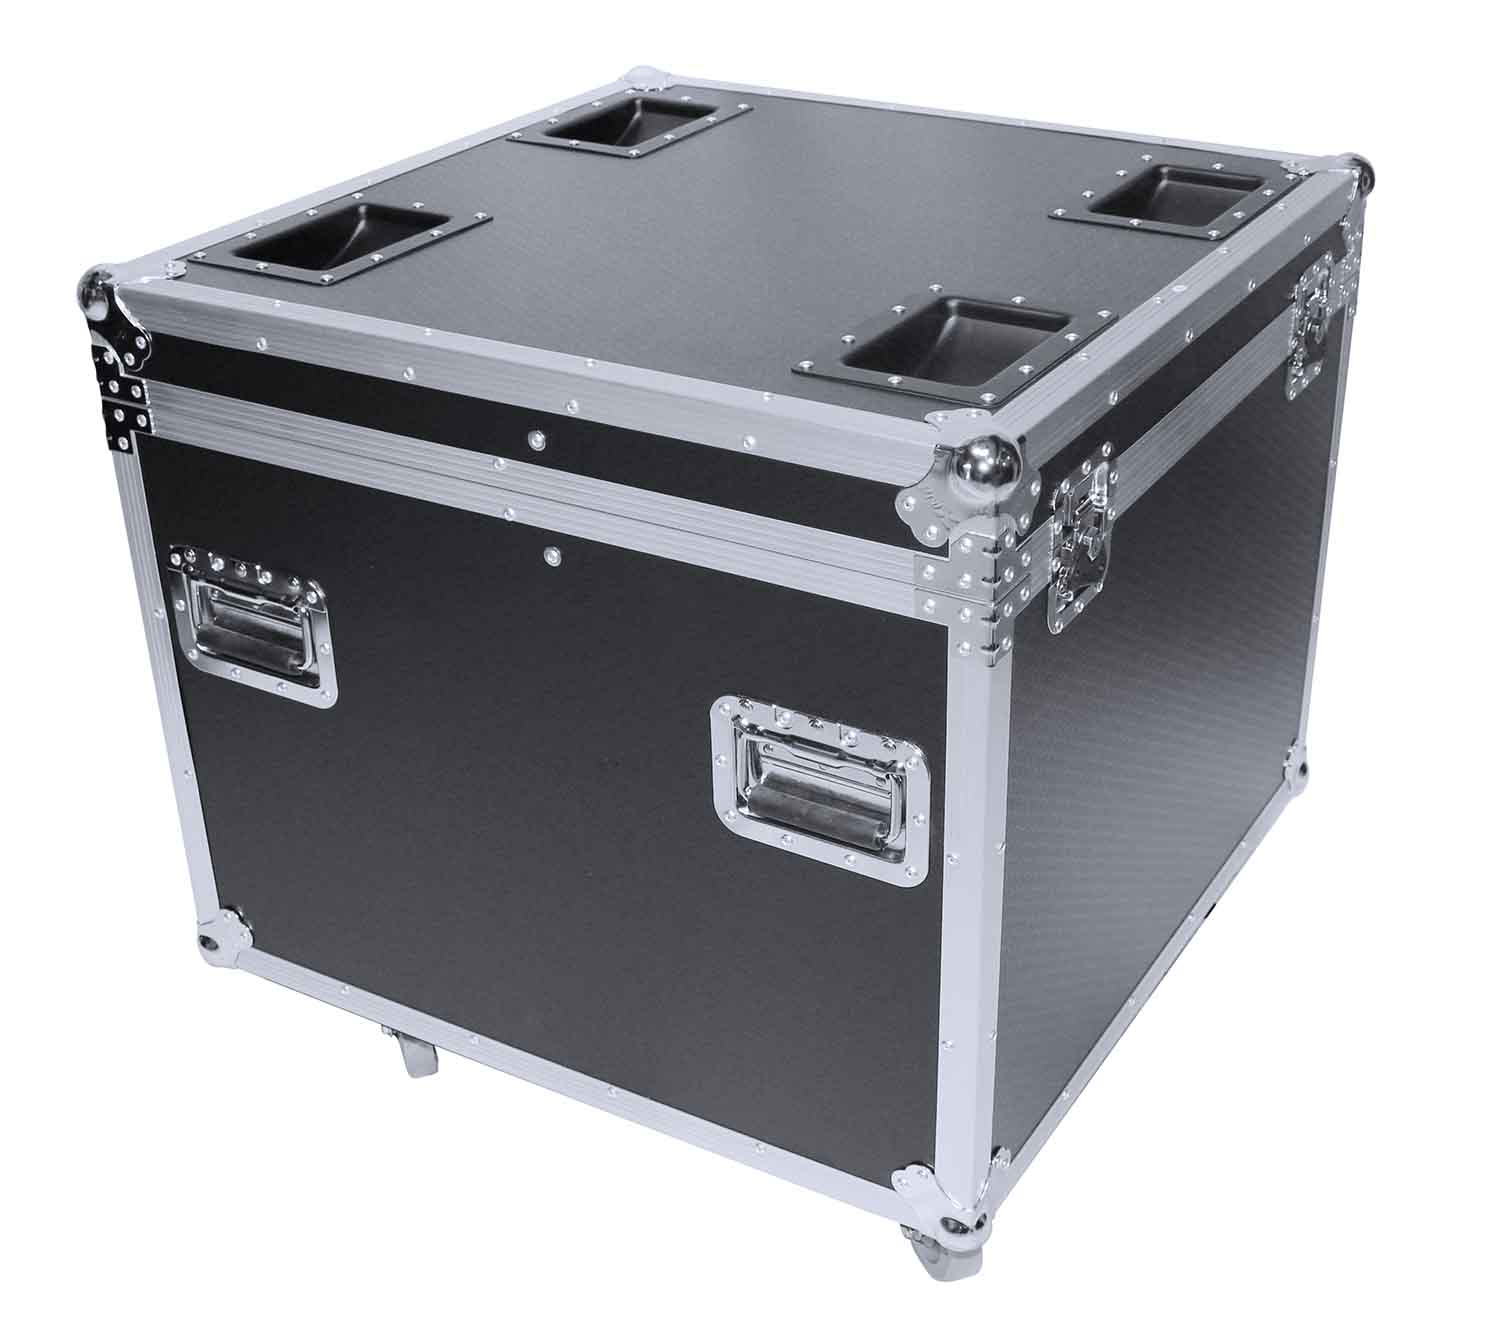 ProX XS-UTL6 Heavy Duty Utility Trunk Case with Caster Cups 4 4" Casters - 29.5" x 29.5" x 29" - Hollywood DJ